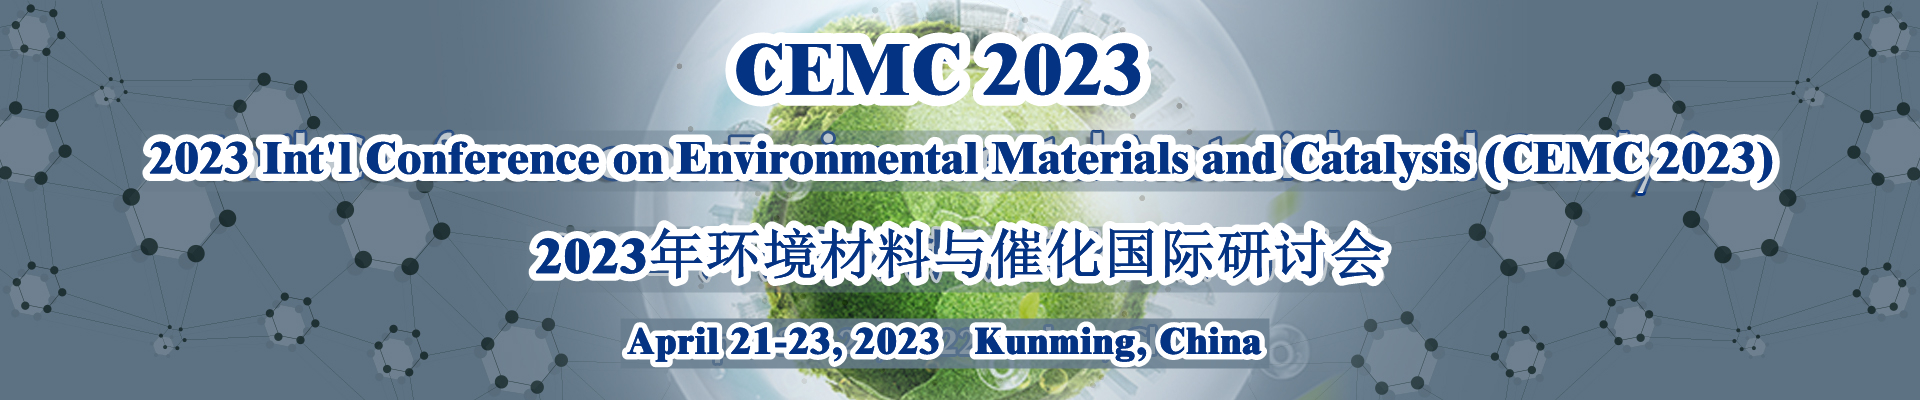 2023 Int'l Conference on Environmental Materials and Catalysis (CEMC 2023)